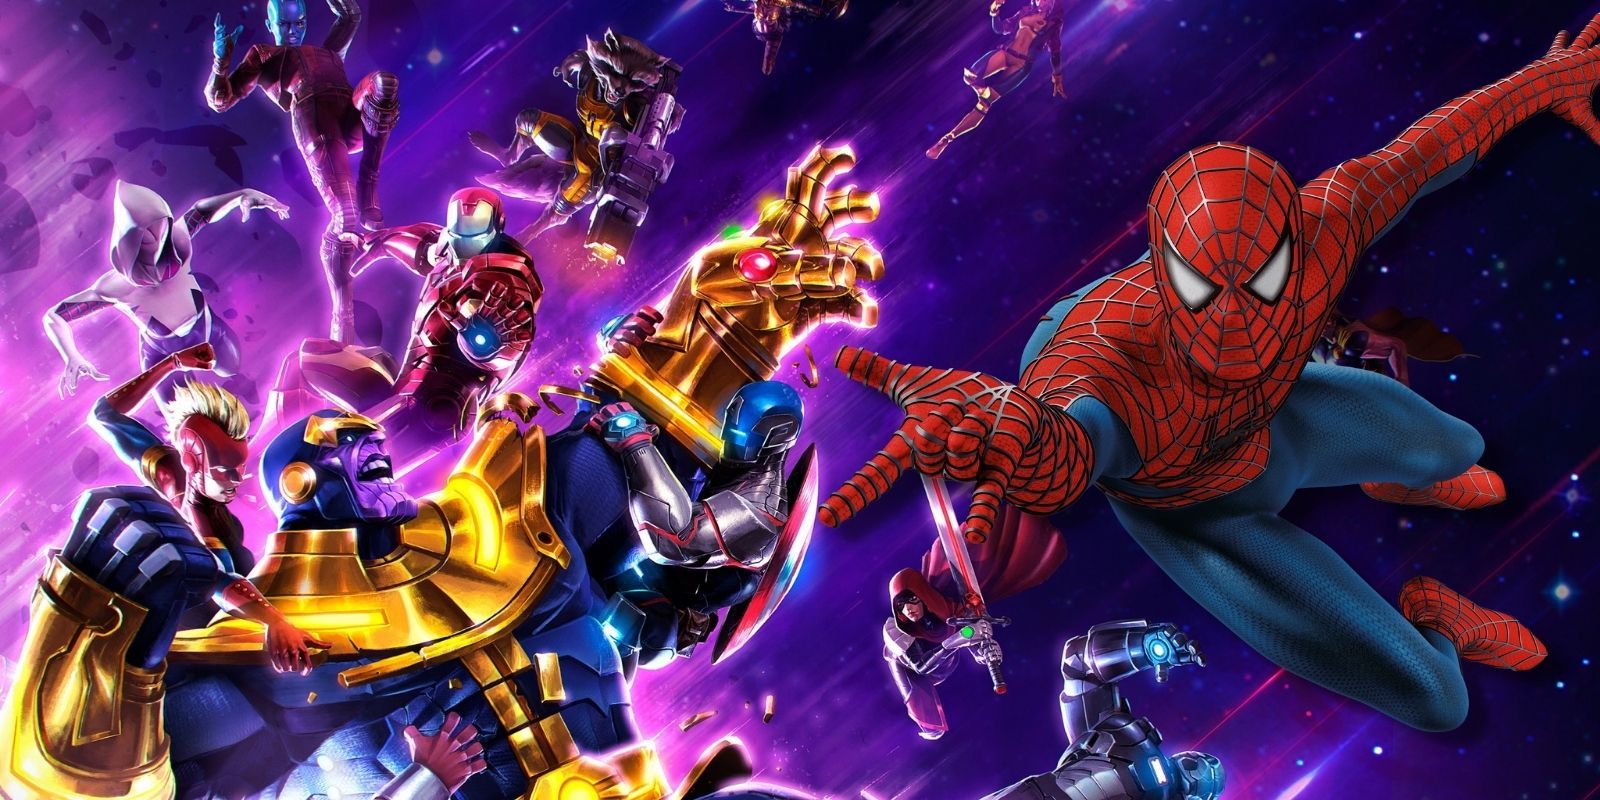 Tobey Maguire's Spider-Man next to key art for Marvel Contest of Champions